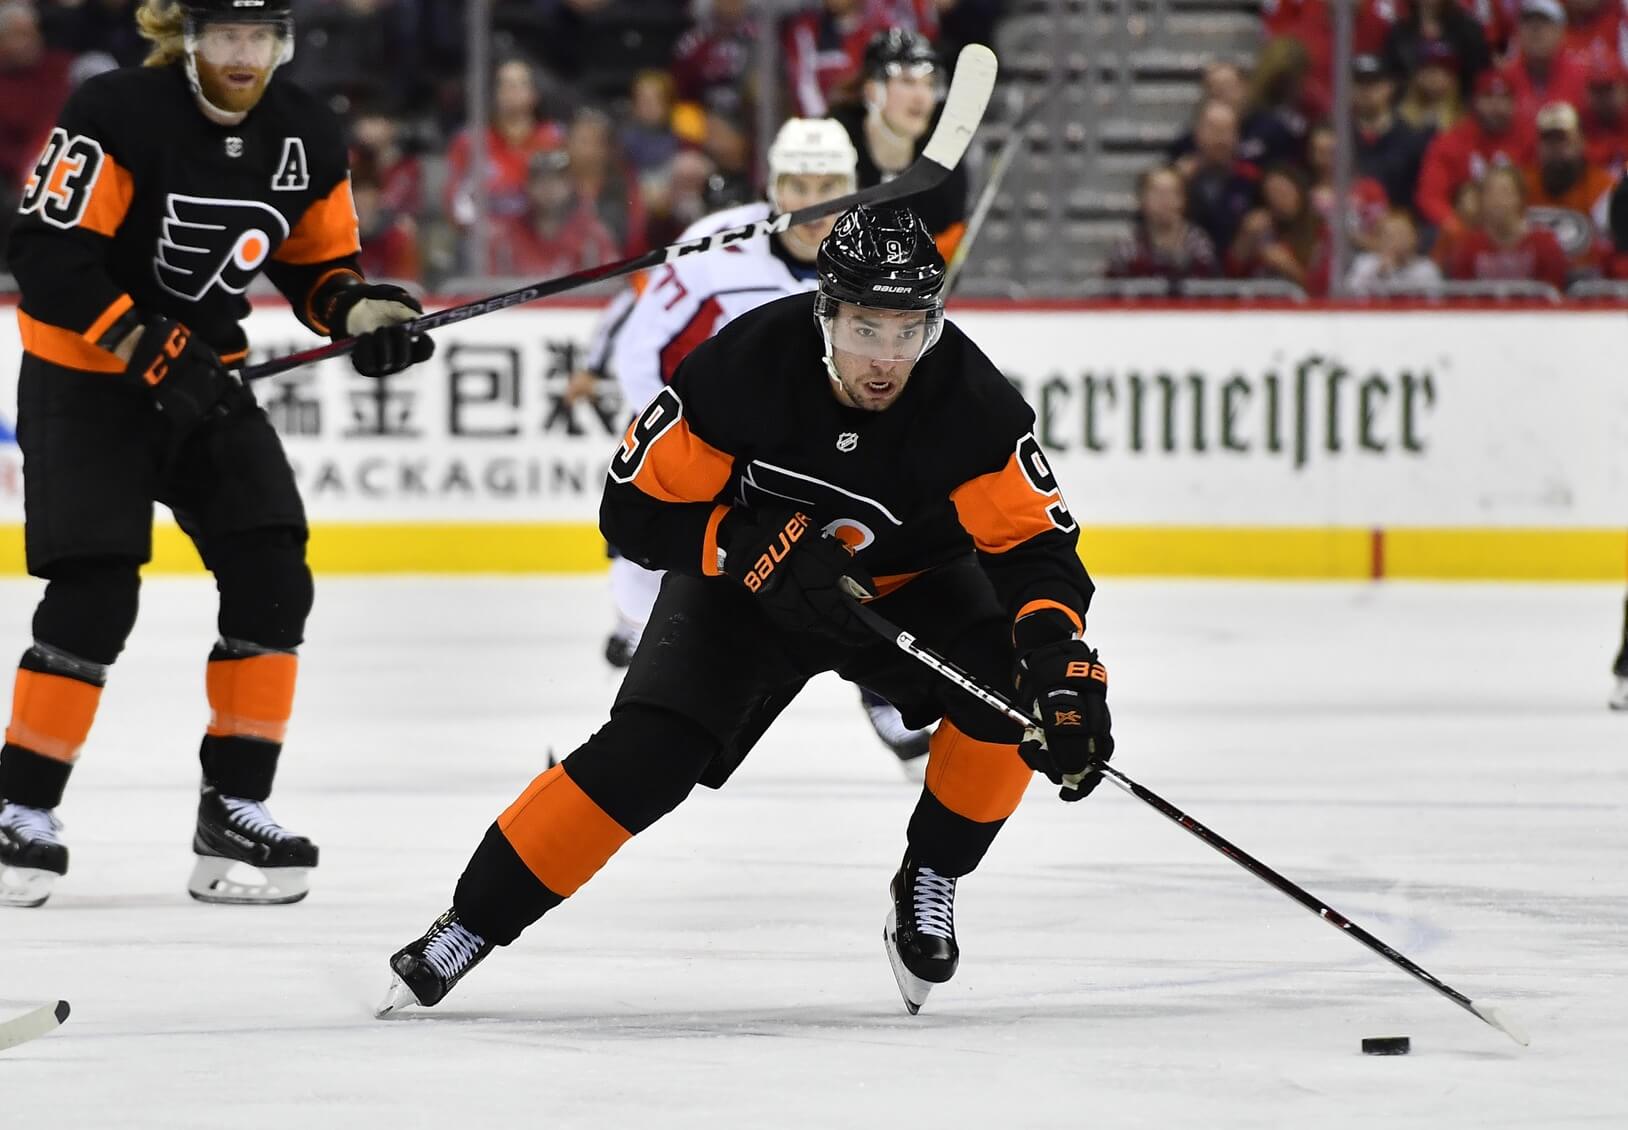 Union hockey: Gostisbehere on Team USA's camp roster